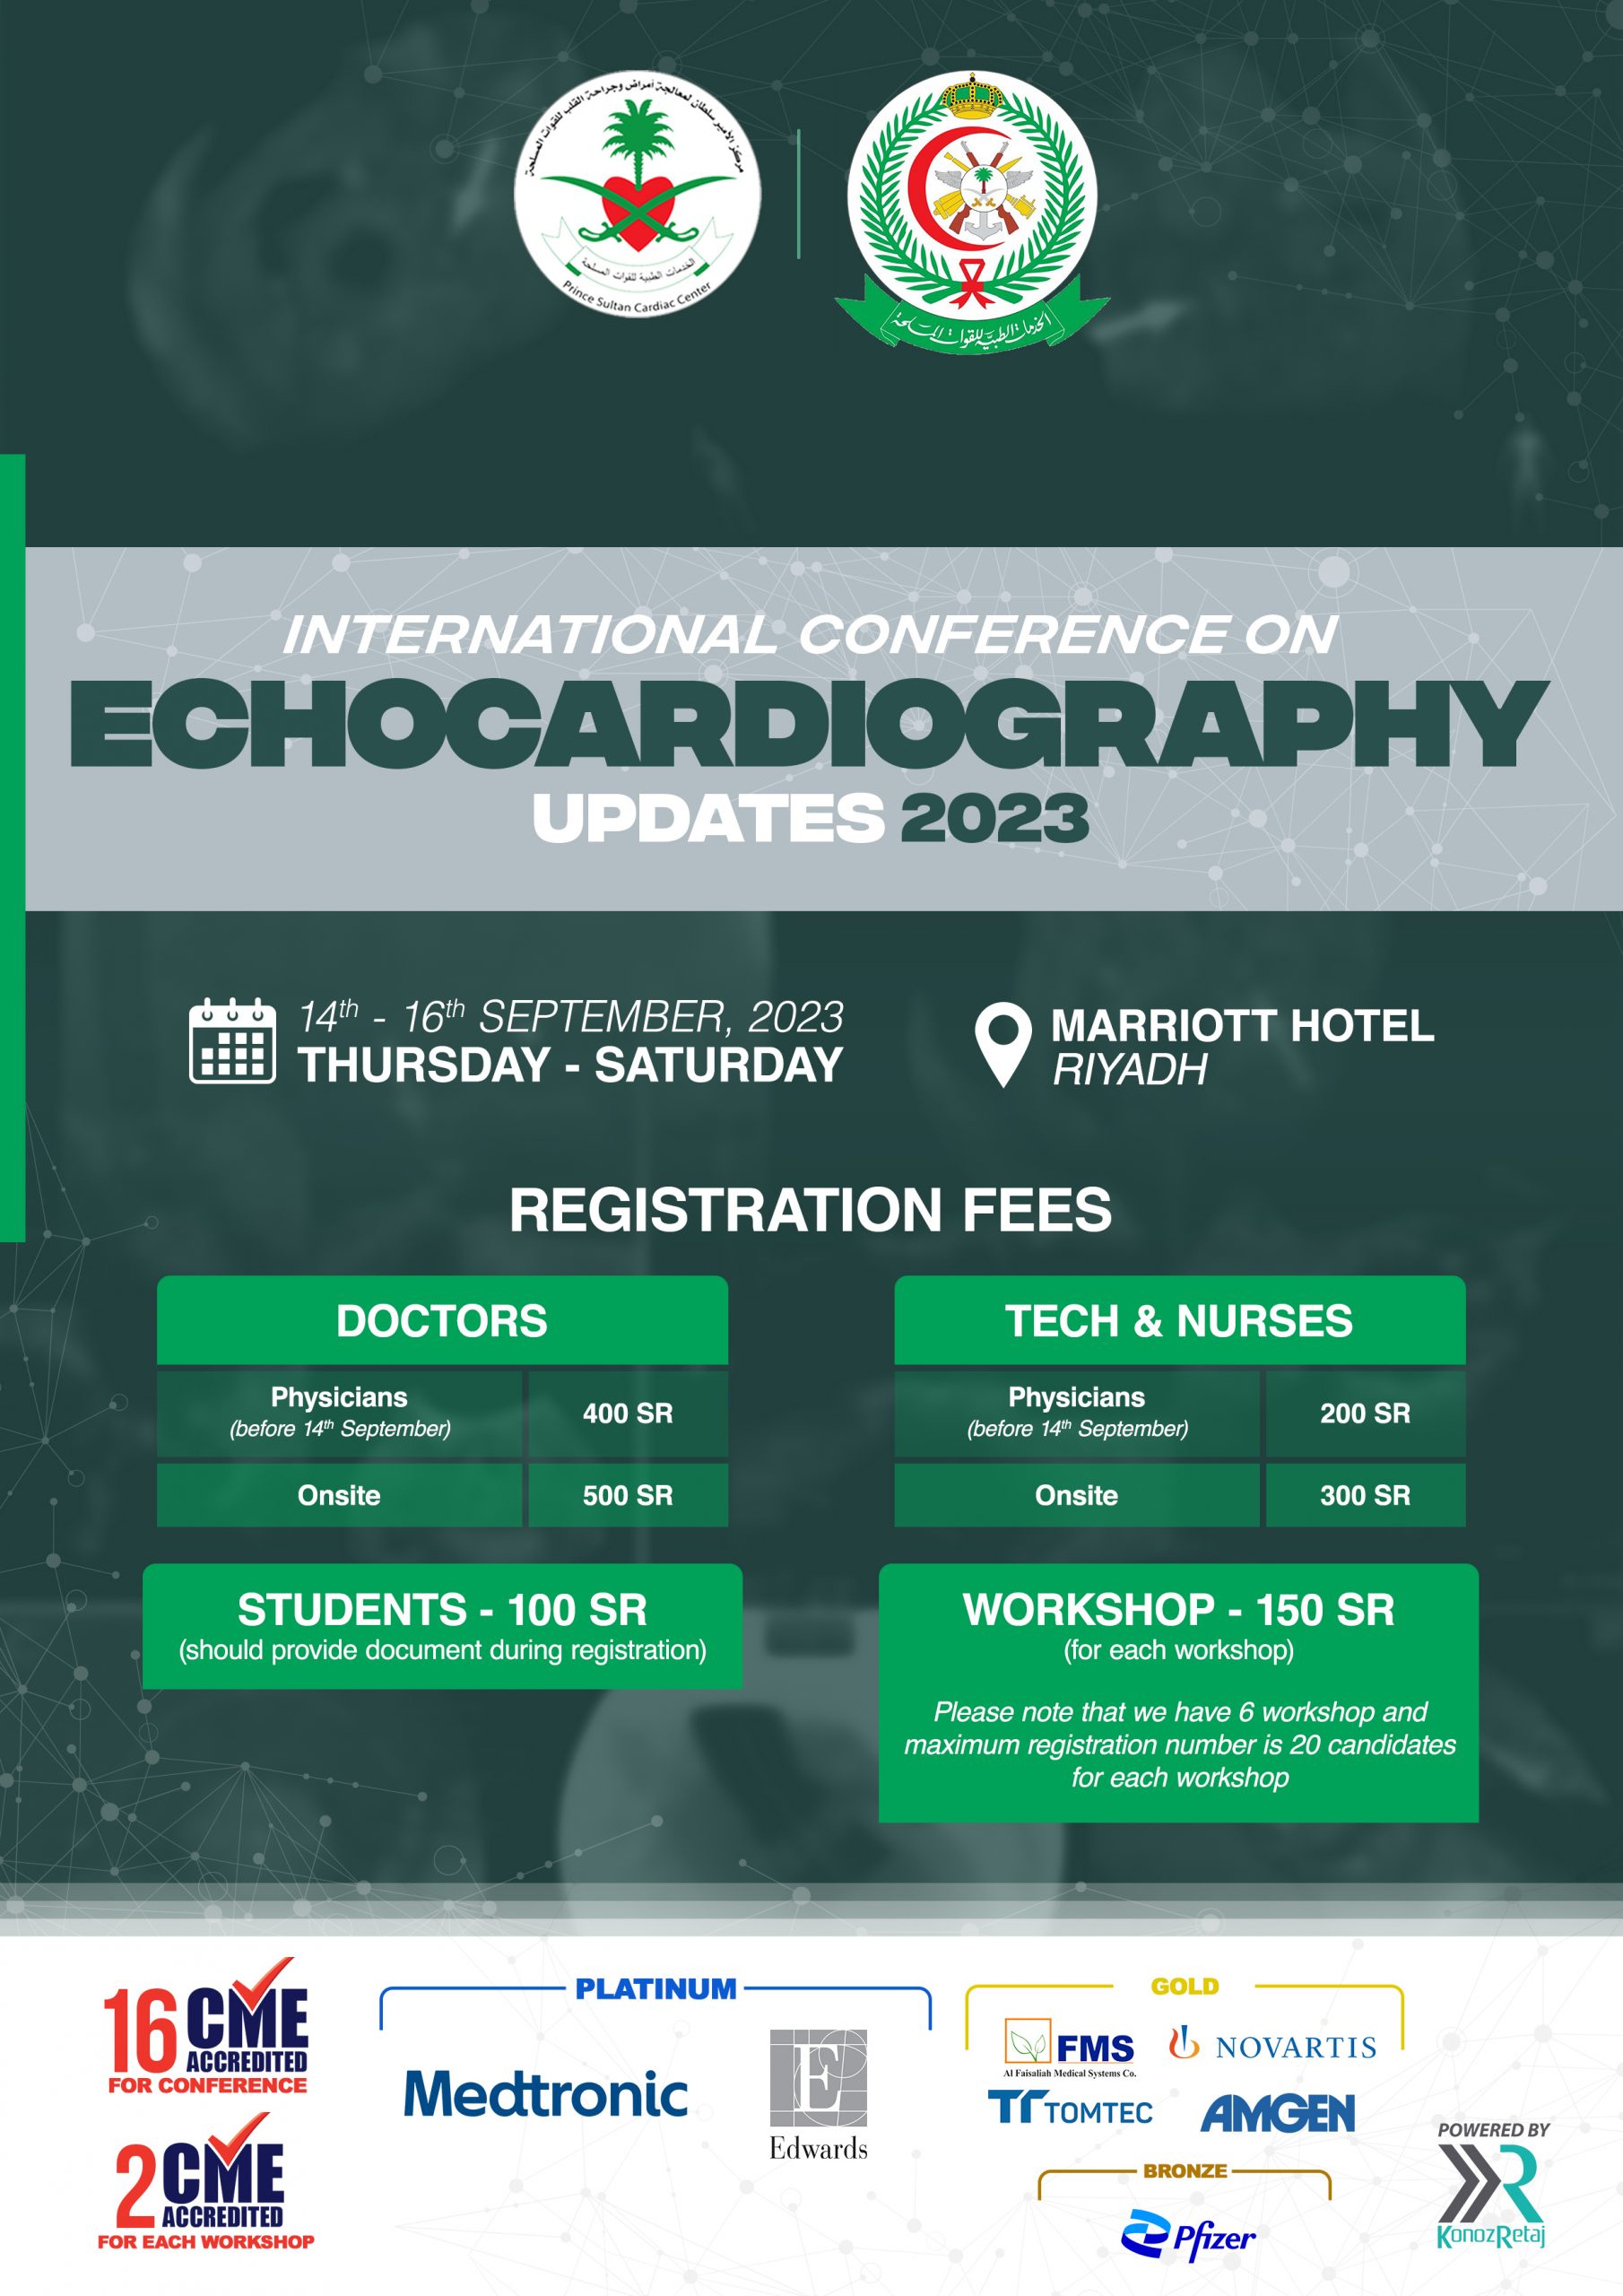 International Conference on Echocardiography Updates 2023